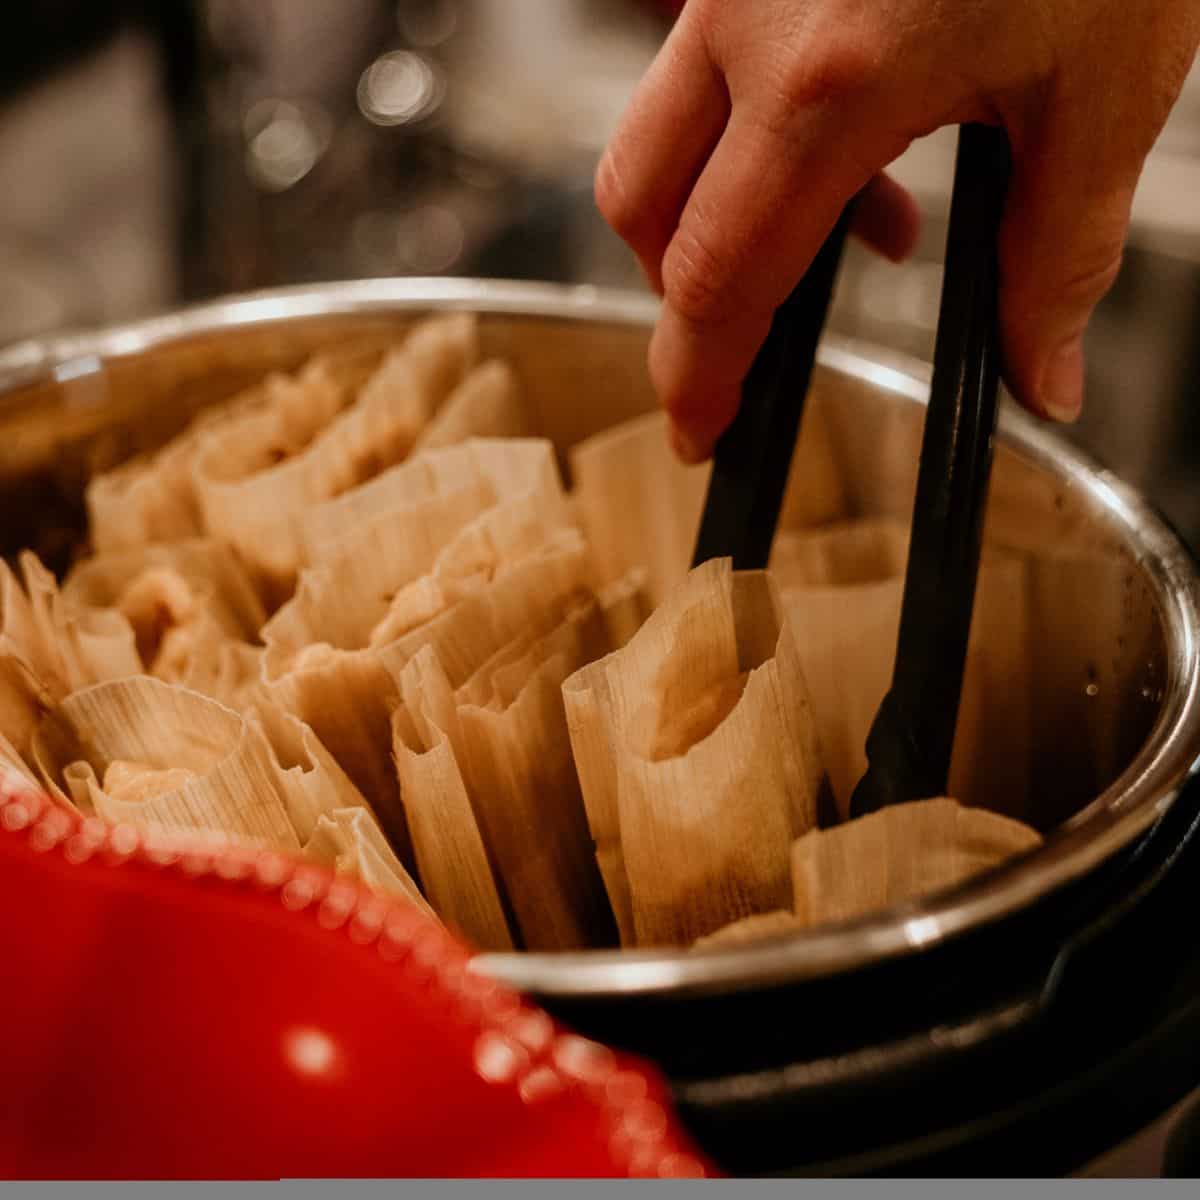 Tamales wrapped in dryed corn husk in a steamer basket with a red bowl in the foreground. A hand holding black tongs attempts to pull a single tamale from the steamer.